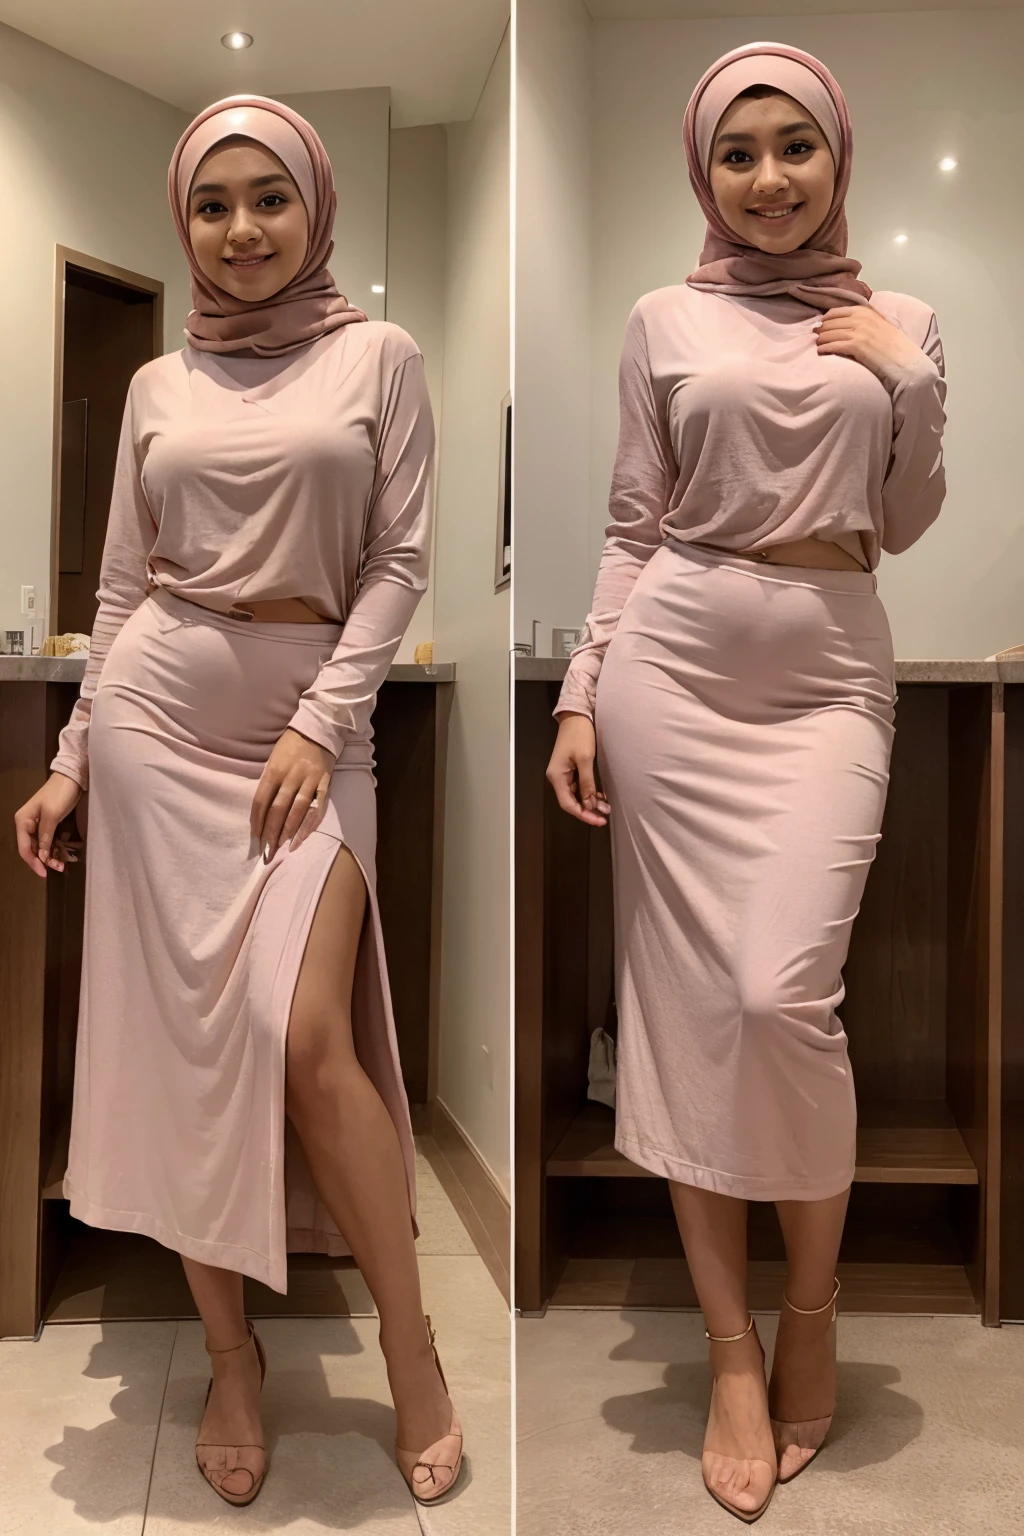 little hijab girl in satin clothes tight short